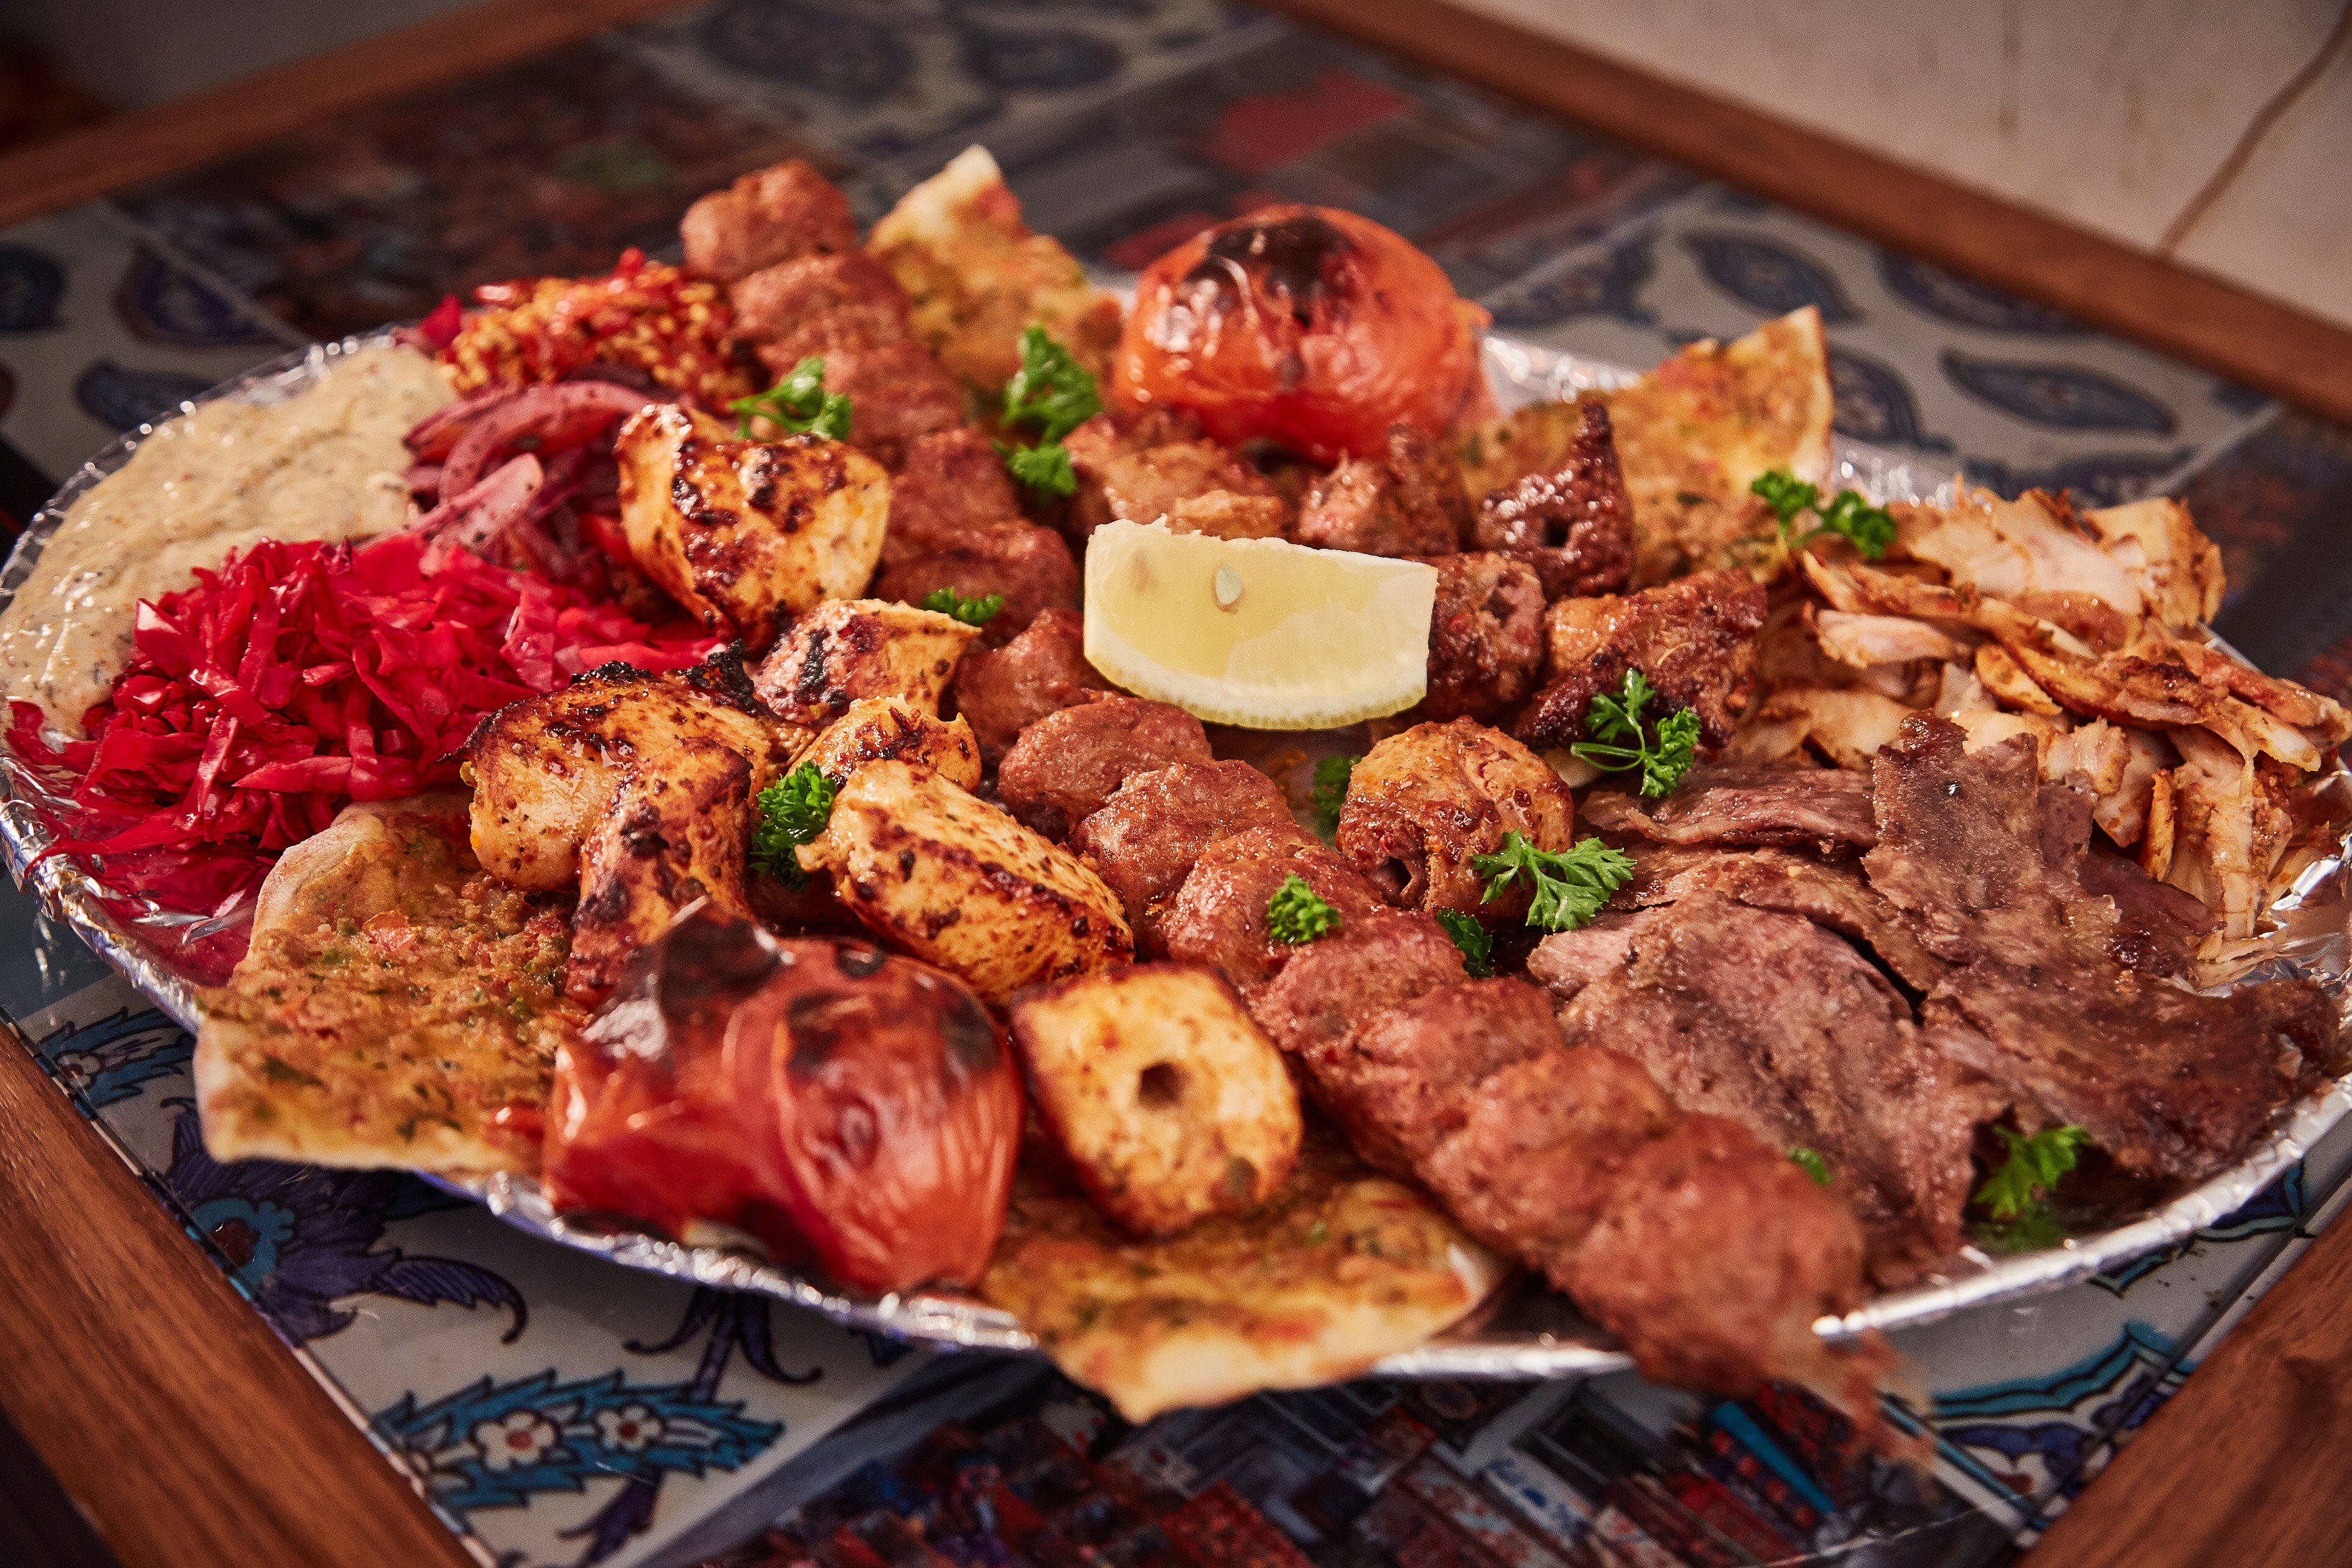 Sofra on Twitter: "Have you tried our mixed grill 2 or 4? Chargrilled over charcoal flames, generous portion accompanied by freshly baked Turkish flatbread, salads and famous signature